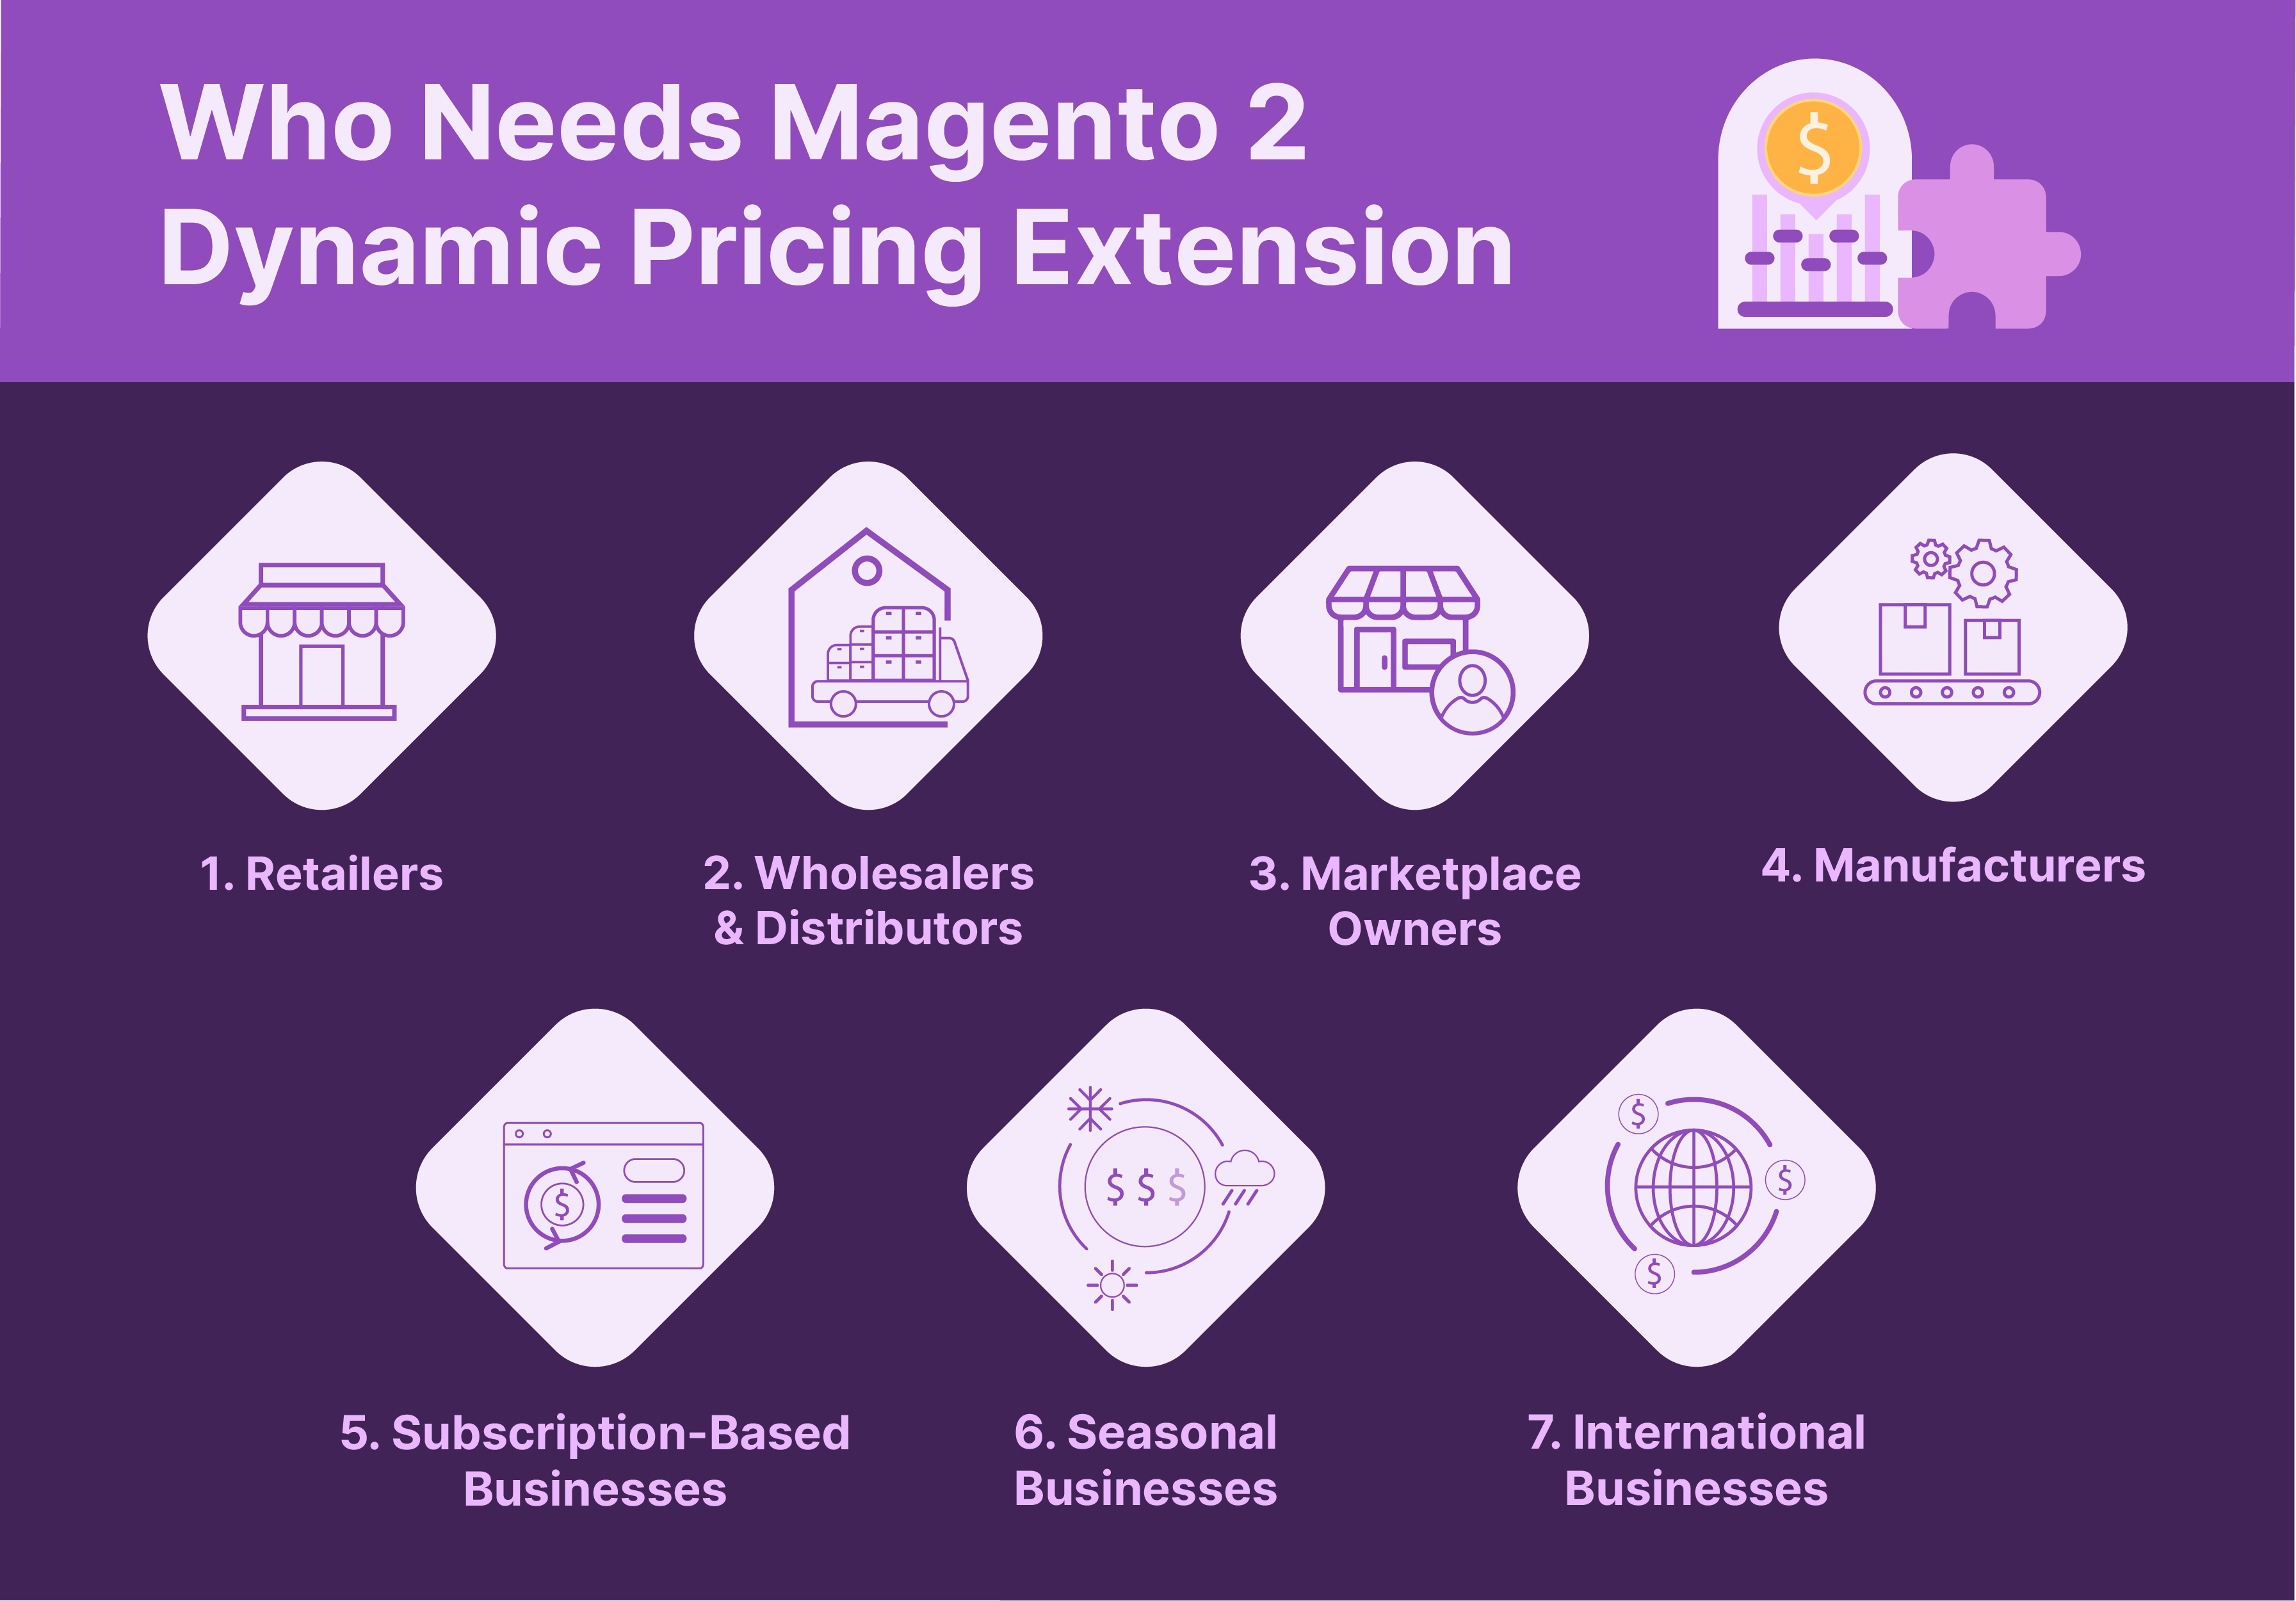 Who Needs Magento 2 Dynamic Pricing Extension